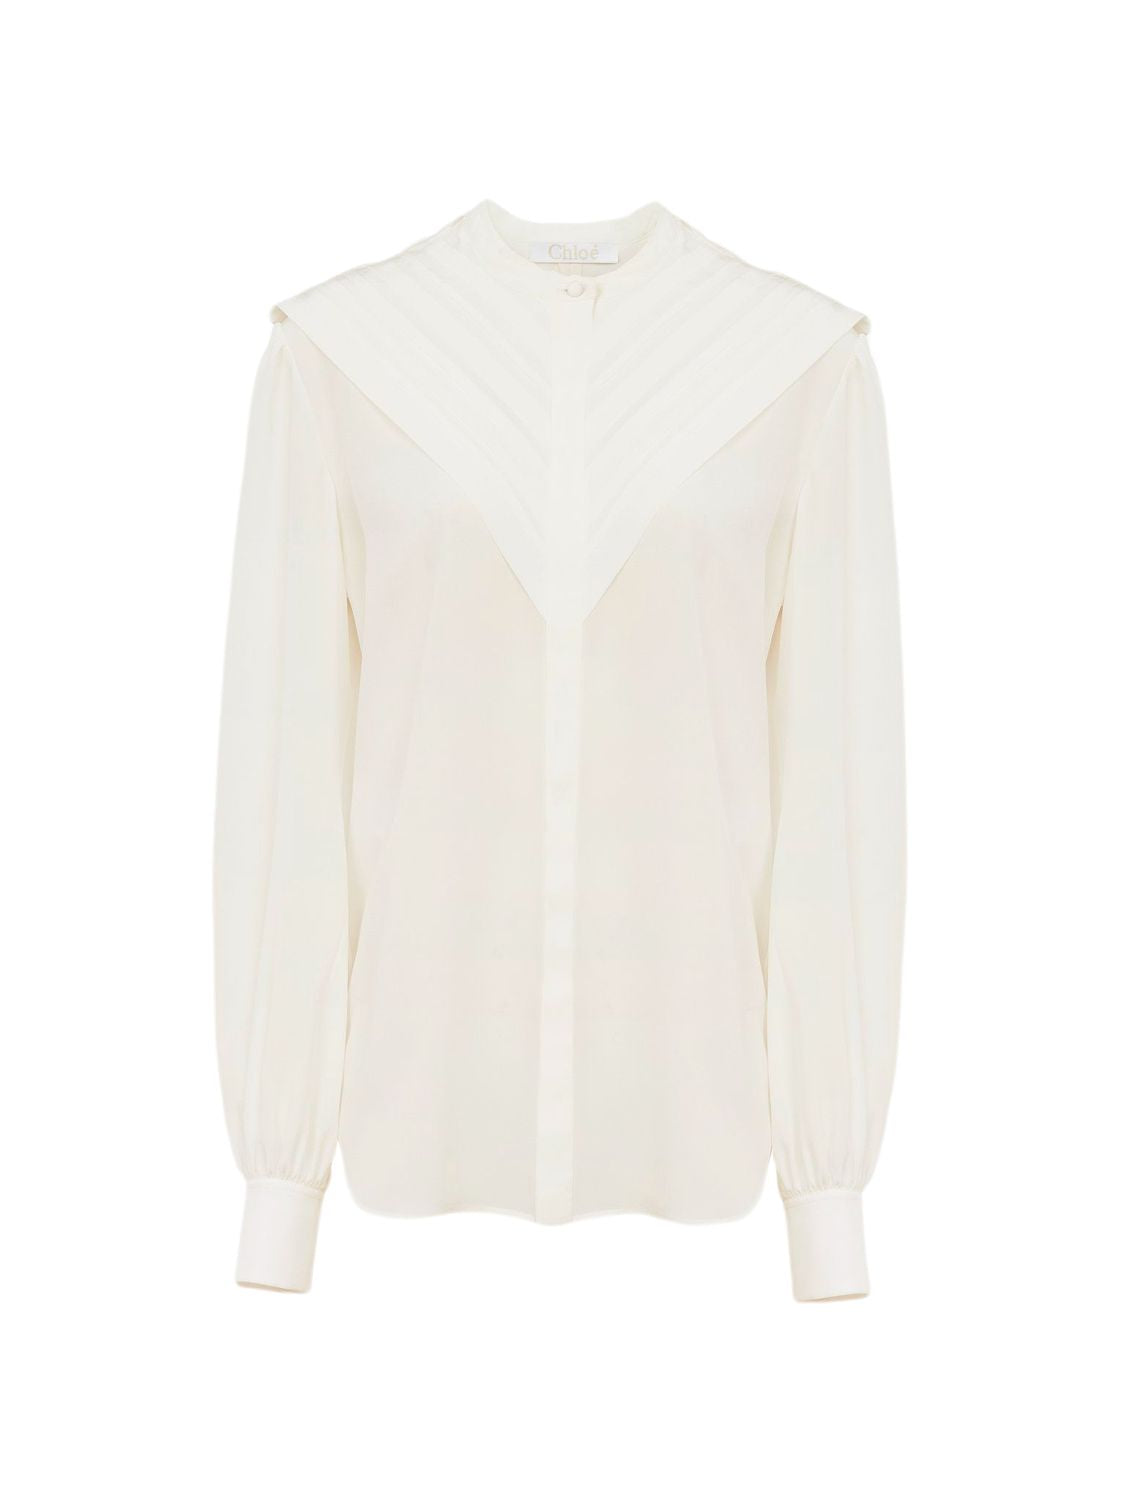 Chloé White Iconic Silk Top For Women In Iconic Milk